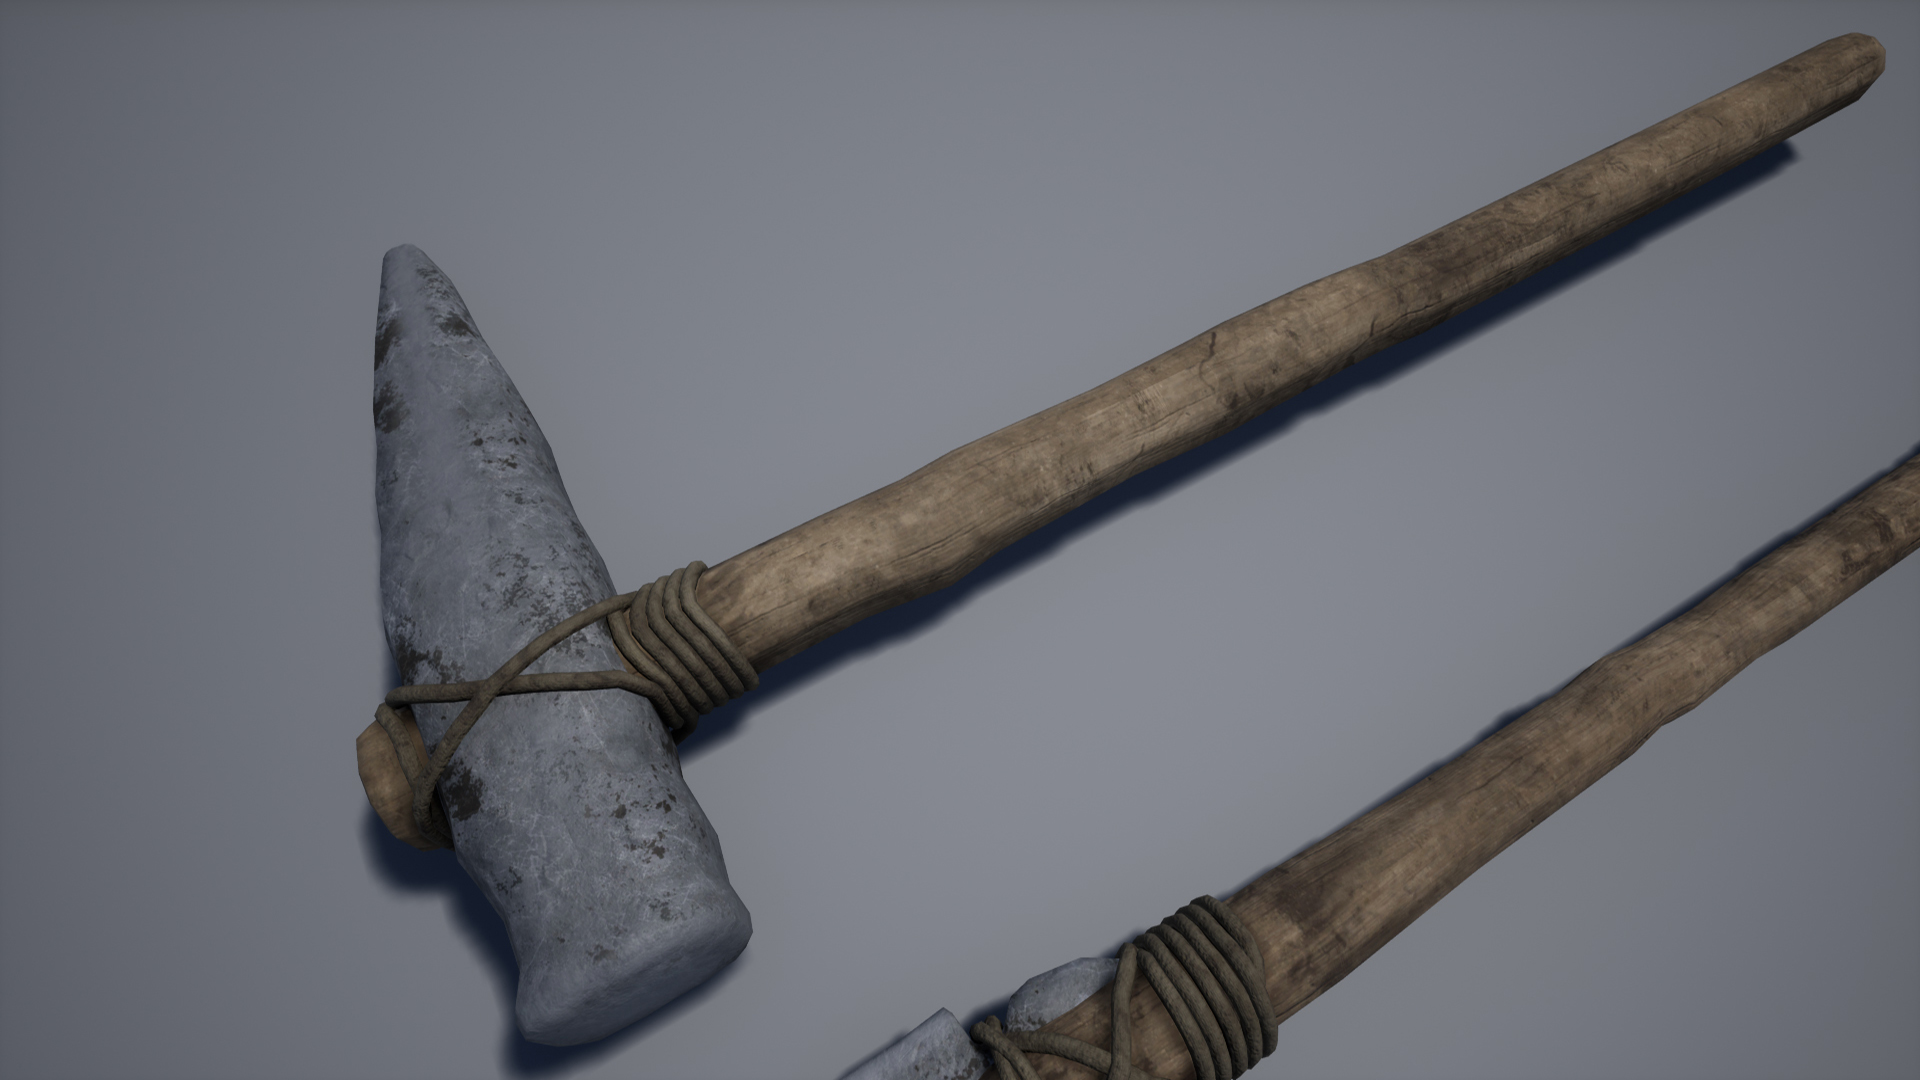 Ancient Tools Pack by SvitchMark in Props - UE4 Marketplace